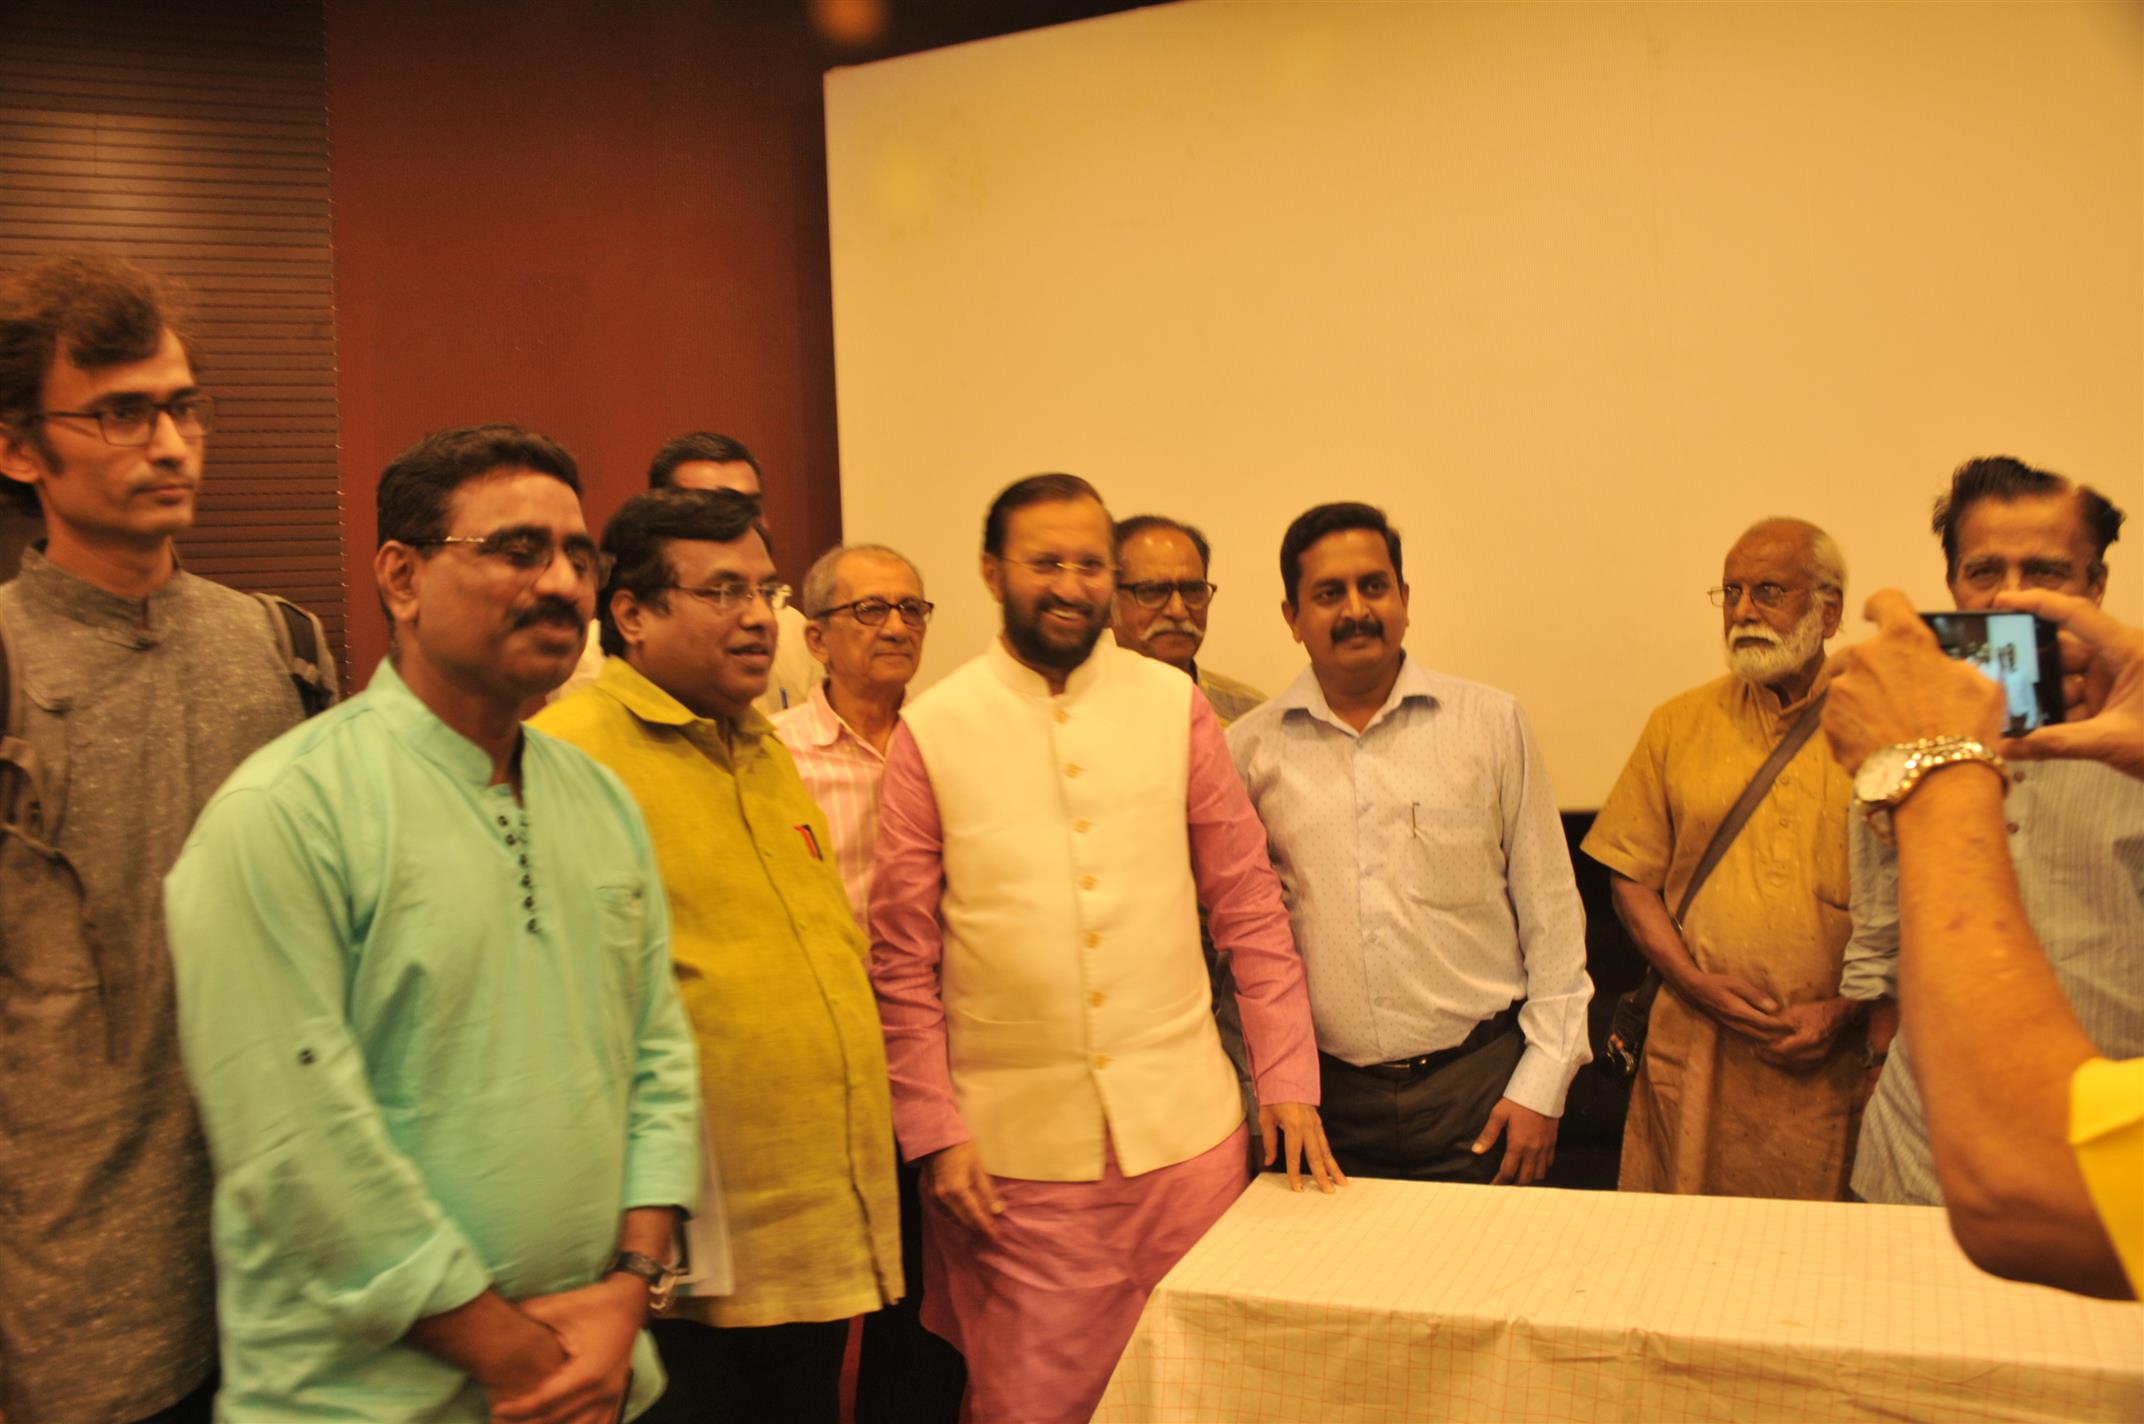 
Minister of Environment, Forest and Climate Change; and Minister of Information and Broadcasting, Shri. Prakash Javadekar visited National Film Archive of India today. During the tour of the facilities at NFAI, he visited all the departments including the newly renovated Jaykar Bunglow. He interacted with the staff and took an overview of the ongoing projects at NFAI.